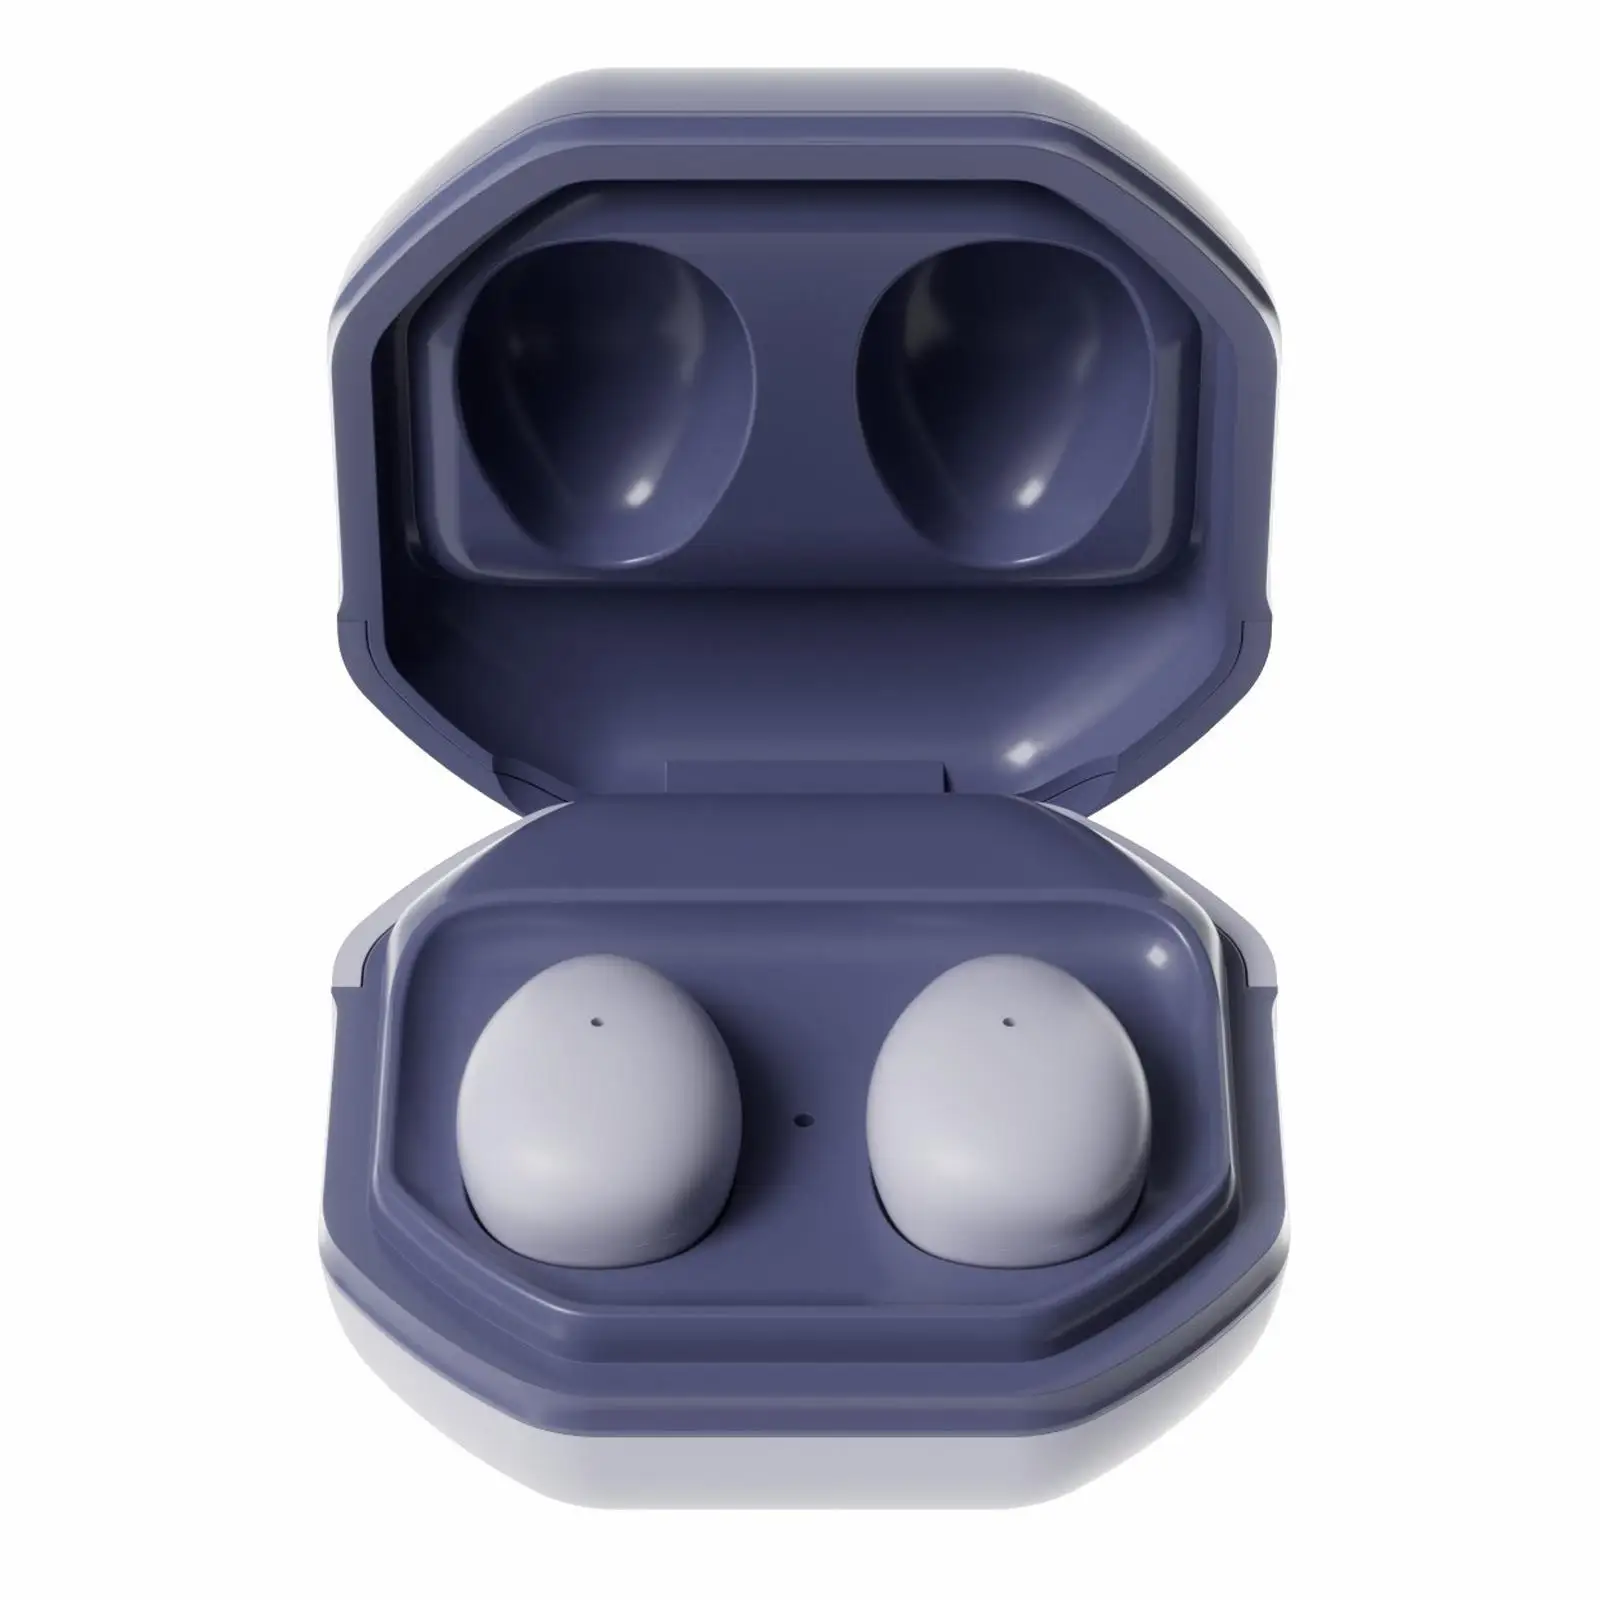 Mini Wireless Earbuds with Charging Case Noise Reduction Low Latency Headphones Earphones for Running Sleeping Working Sports